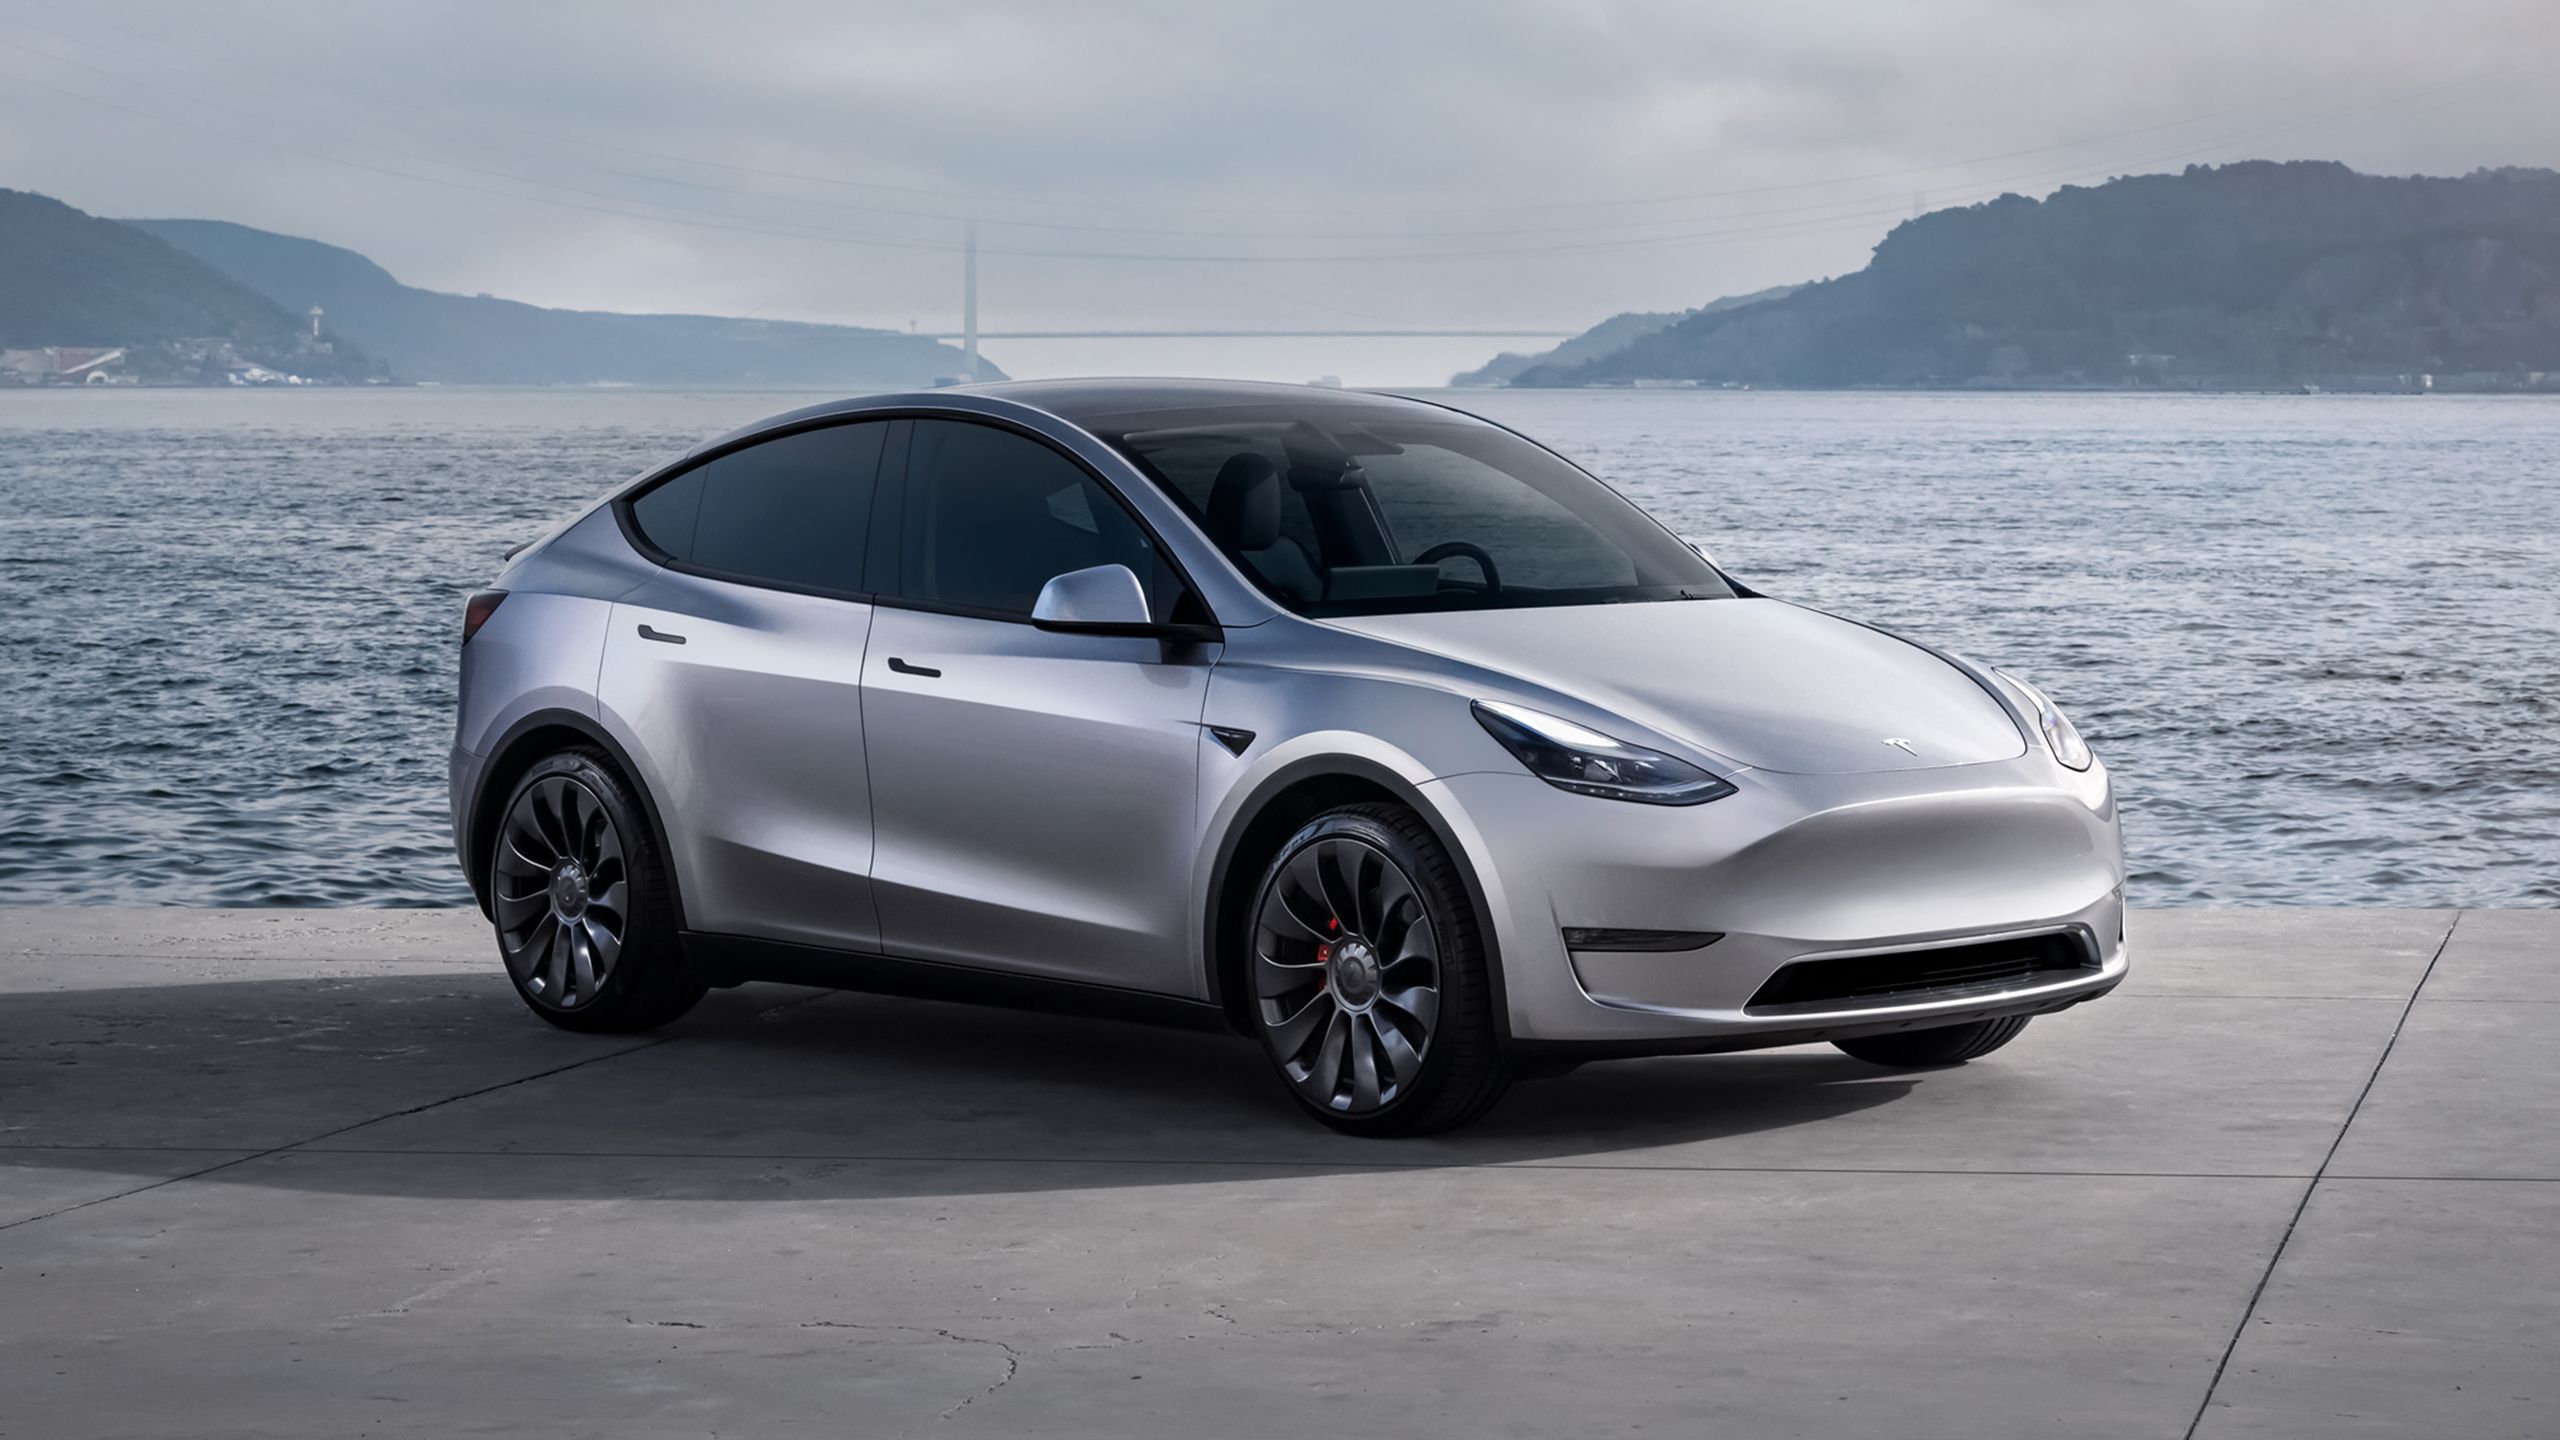 Tesla Model Y in front of a bay on a cloudy day.